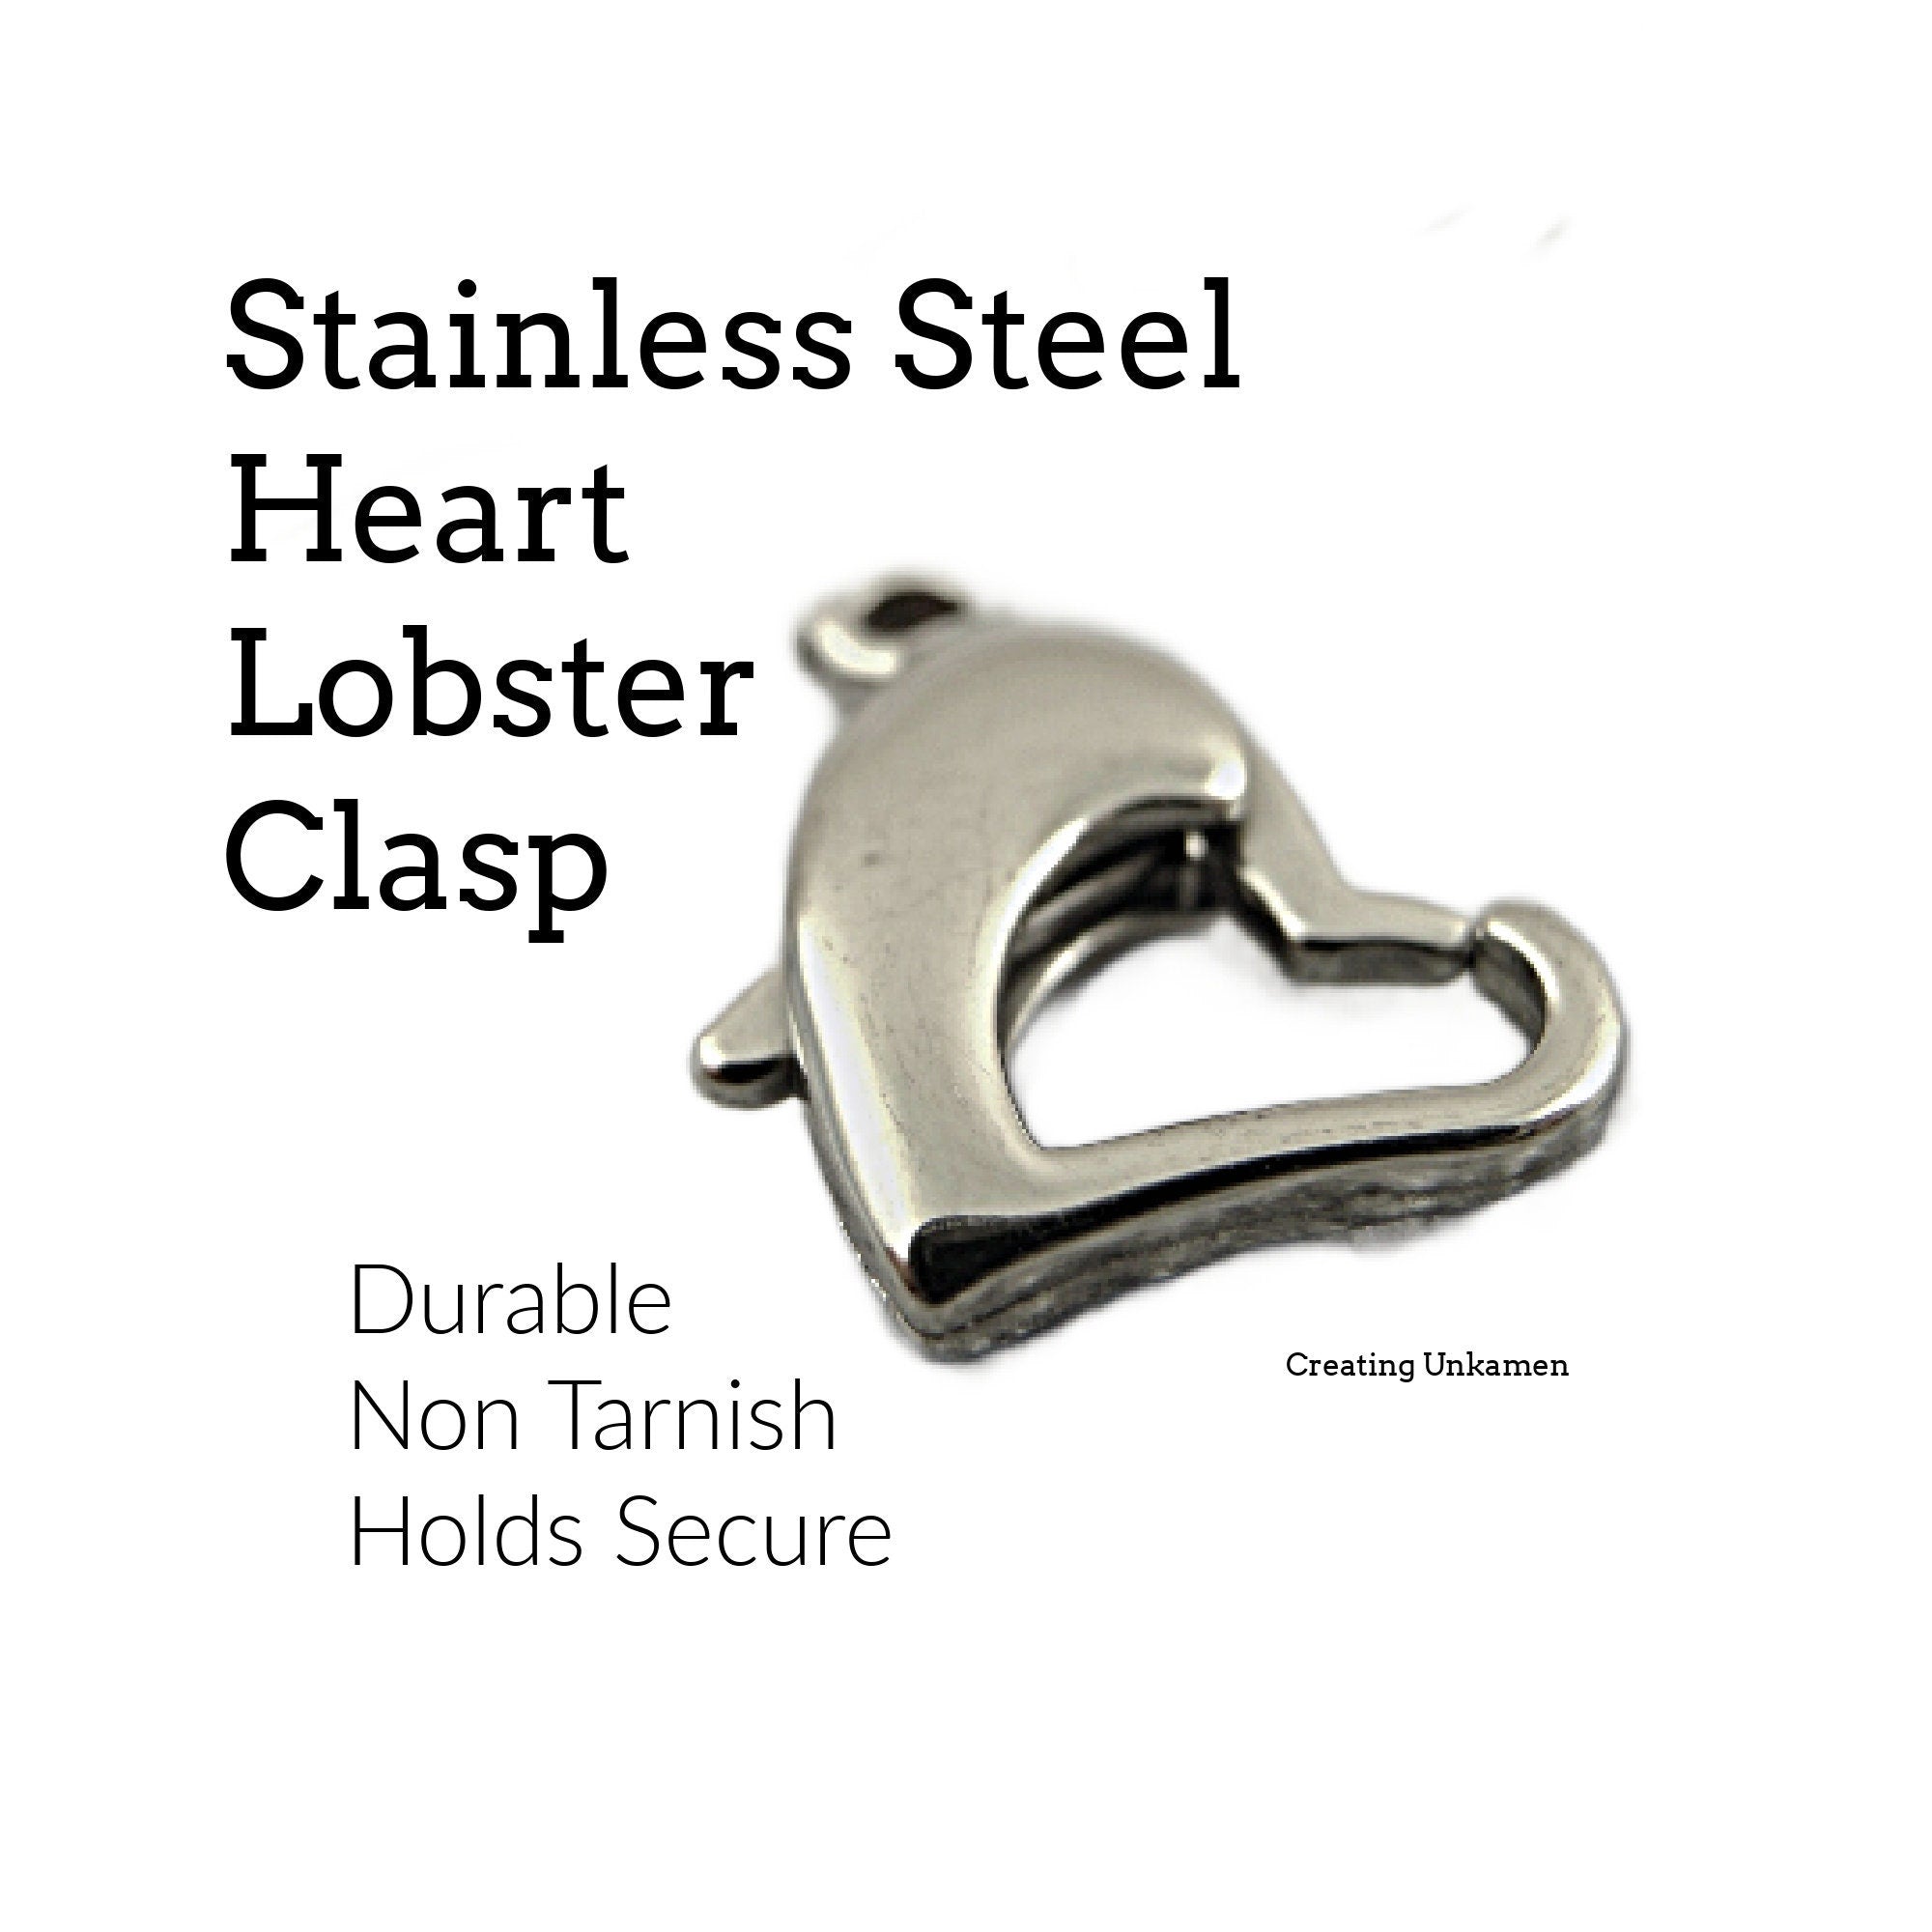 1 Stainless Steel Lobster Clasp - Flat Oval Style in 13mm, 14mm, 18mm, 24mm